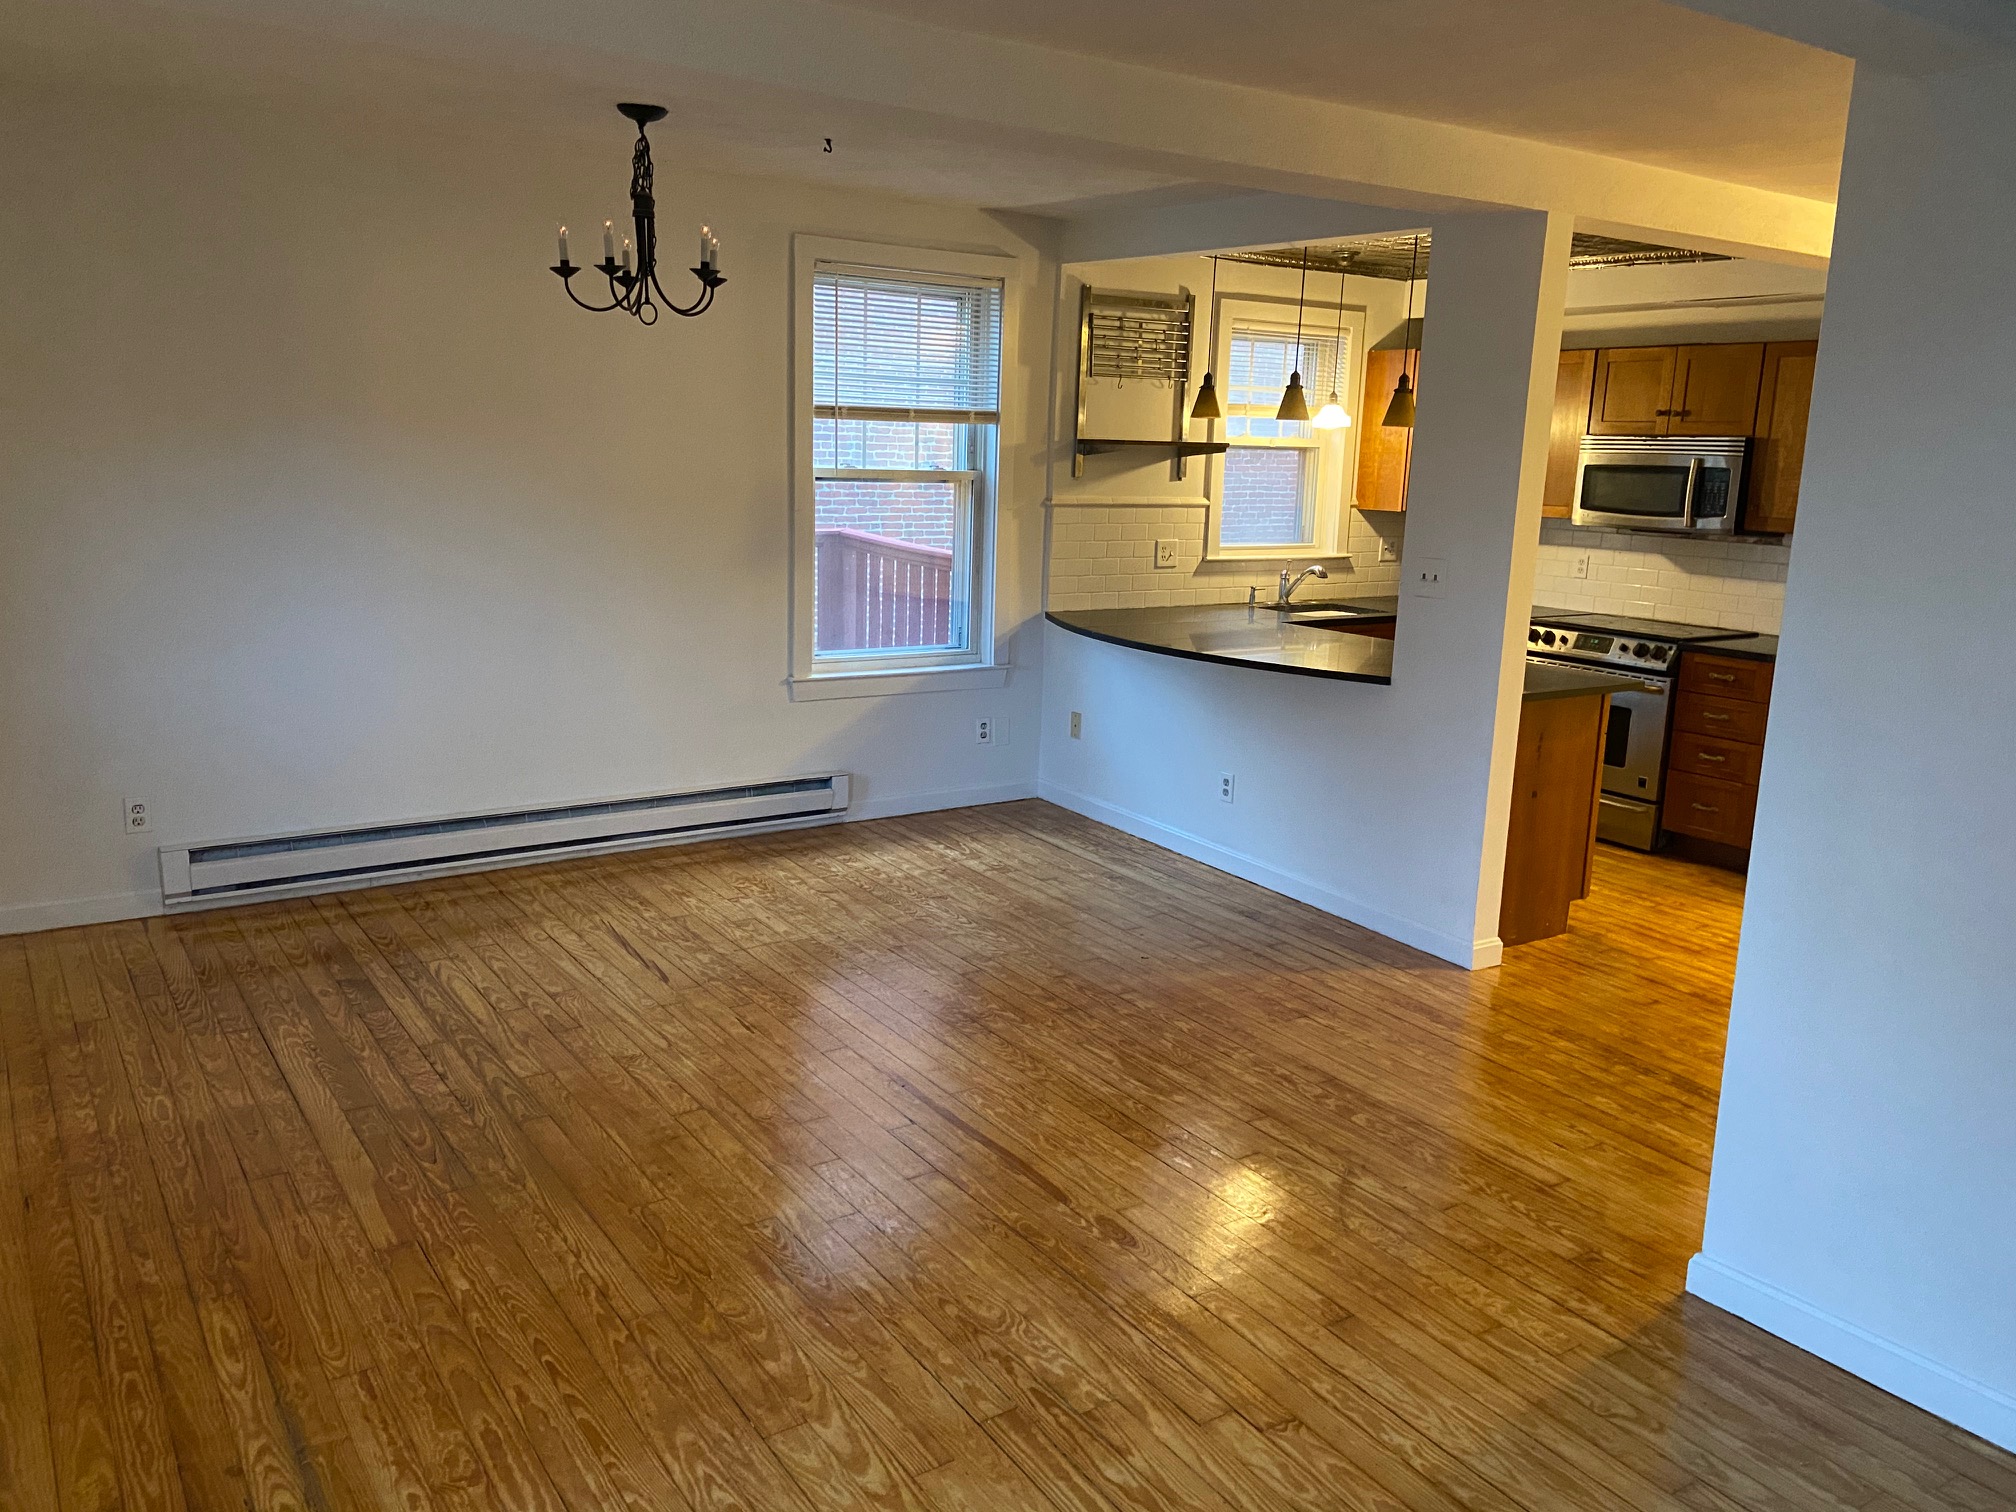 Photos of apartment on Pembroke St.,Chelsea MA 02150